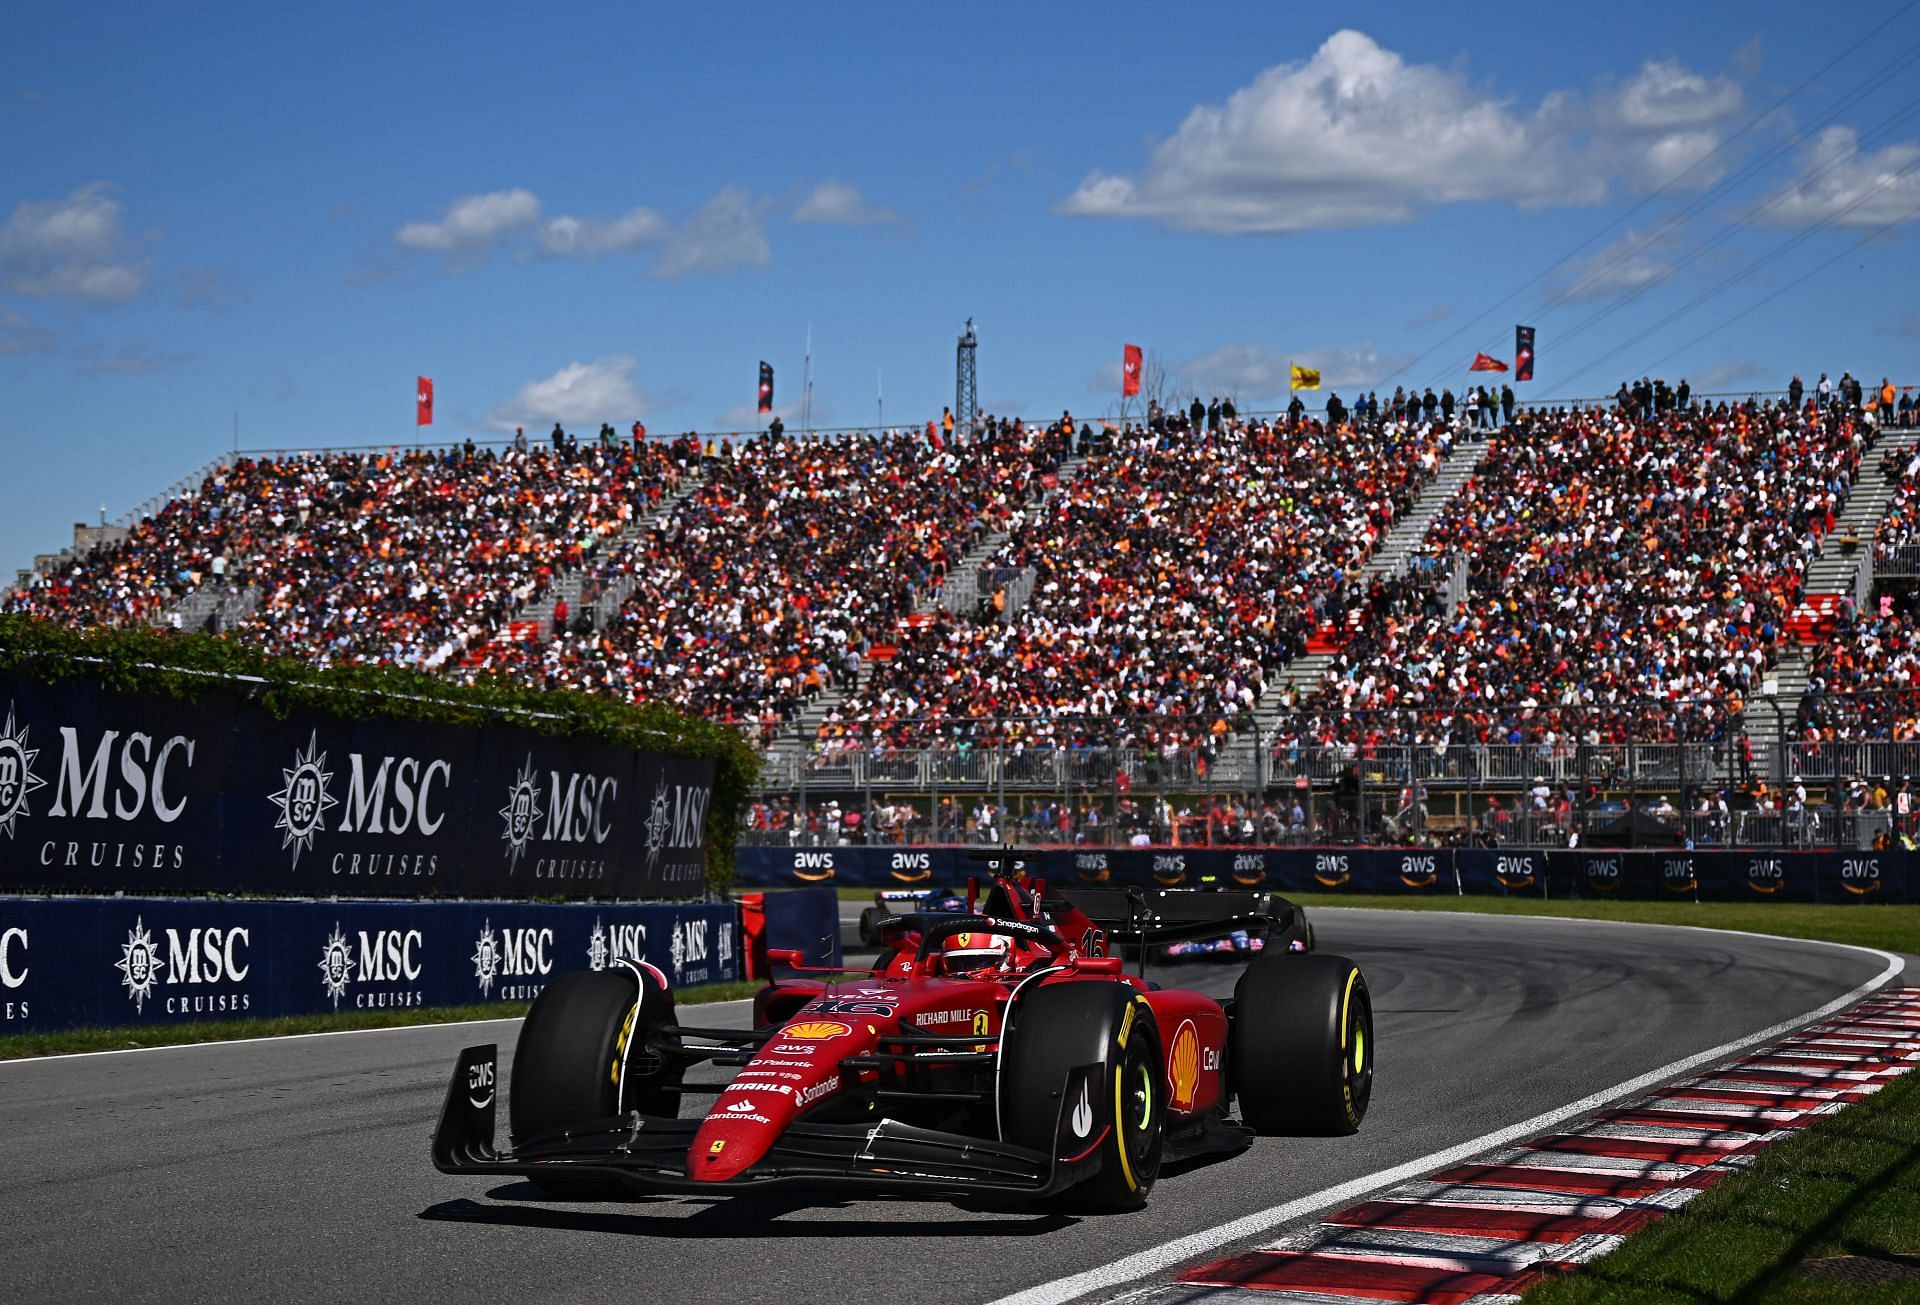 Ferrari driver Charles Leclerc in action during the 2022 F1 Canadian GP. (Photo by Clive Mason/Getty Images)